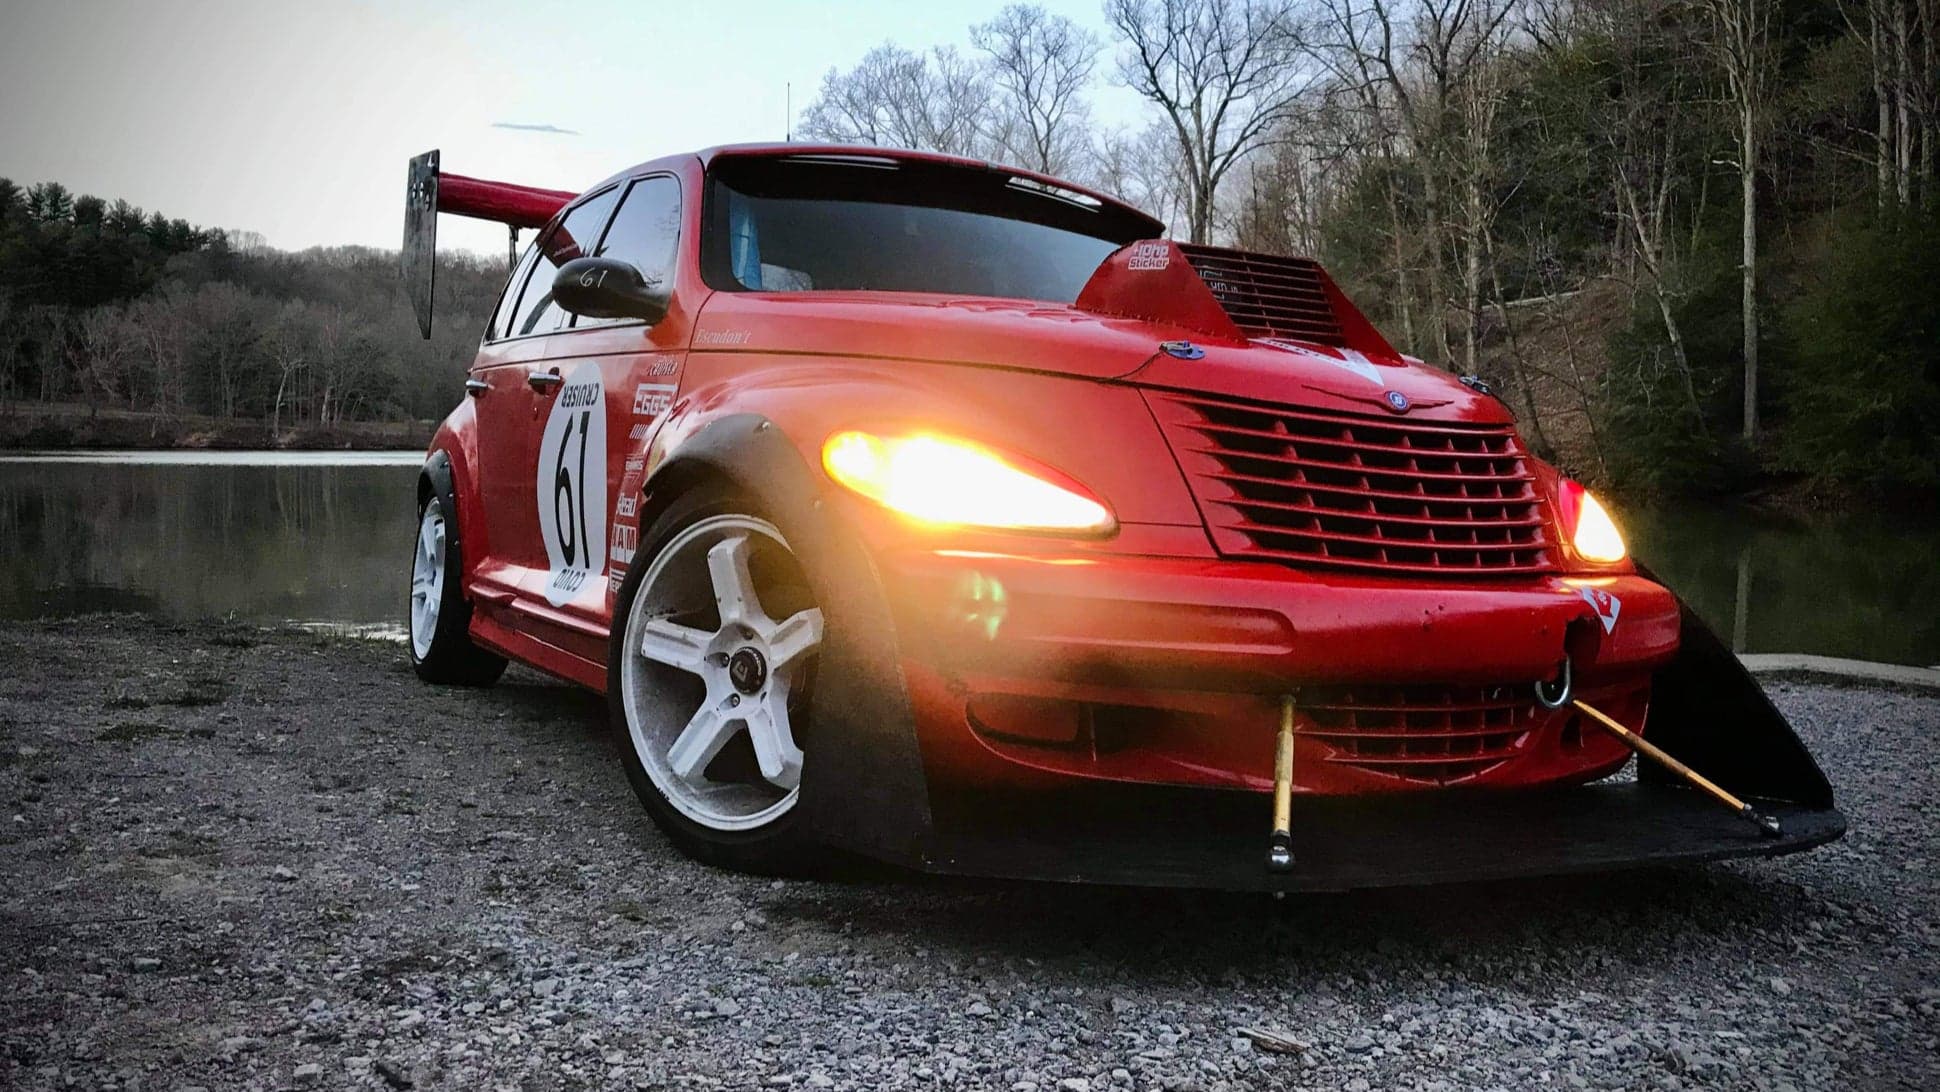 That Viral Pikes Peak-Inspired PT Cruiser With the Huge Aero Is Really Going Racing